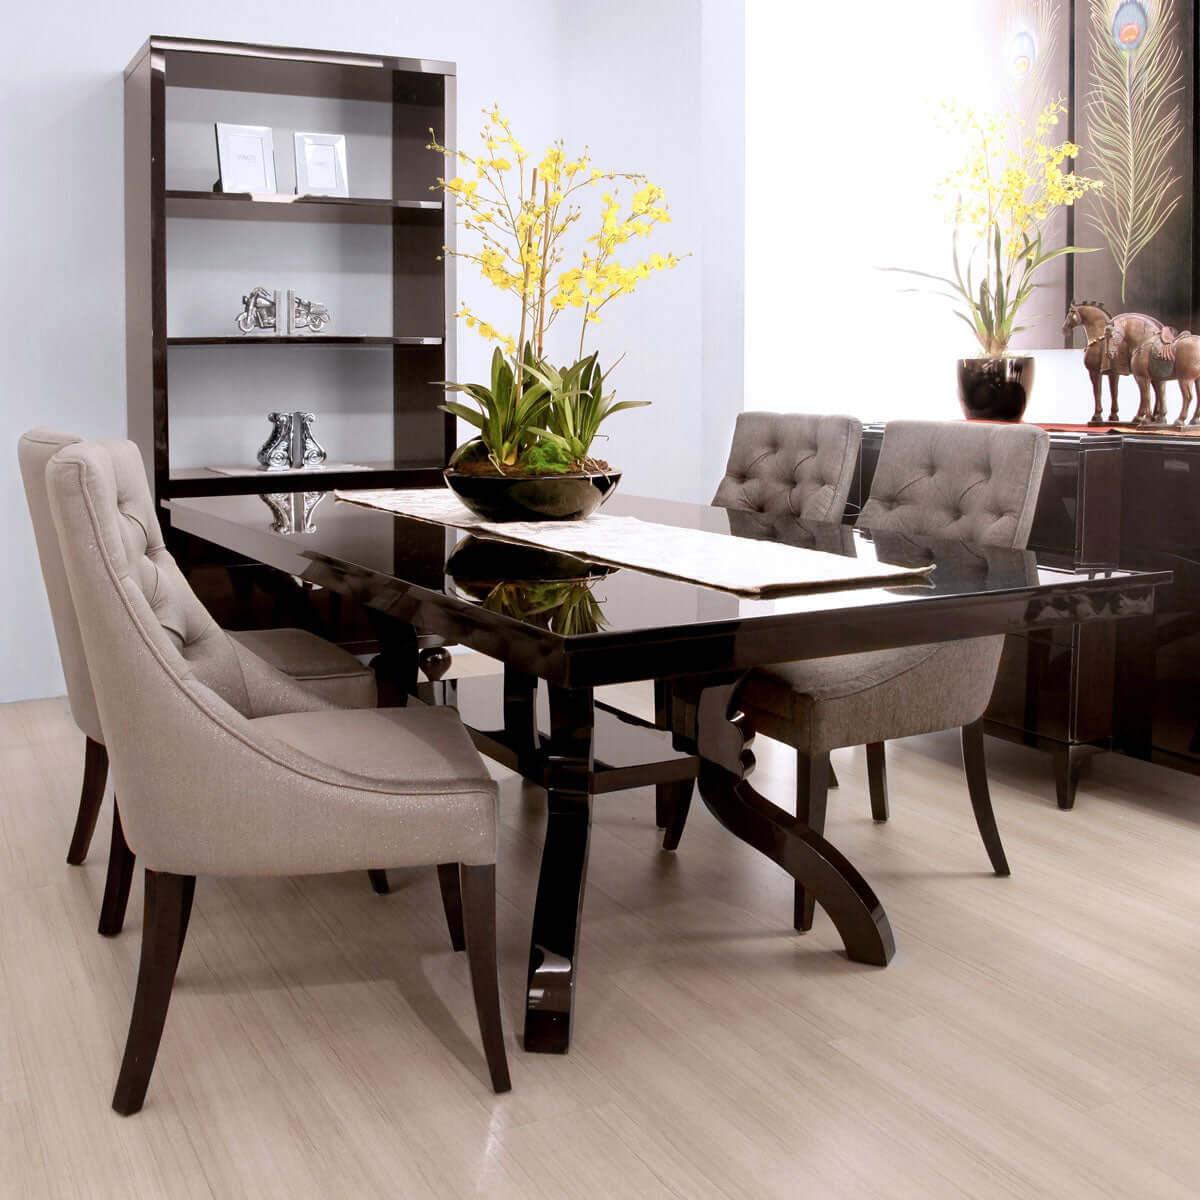 Home Decor Story 4 dining  table  jakarta